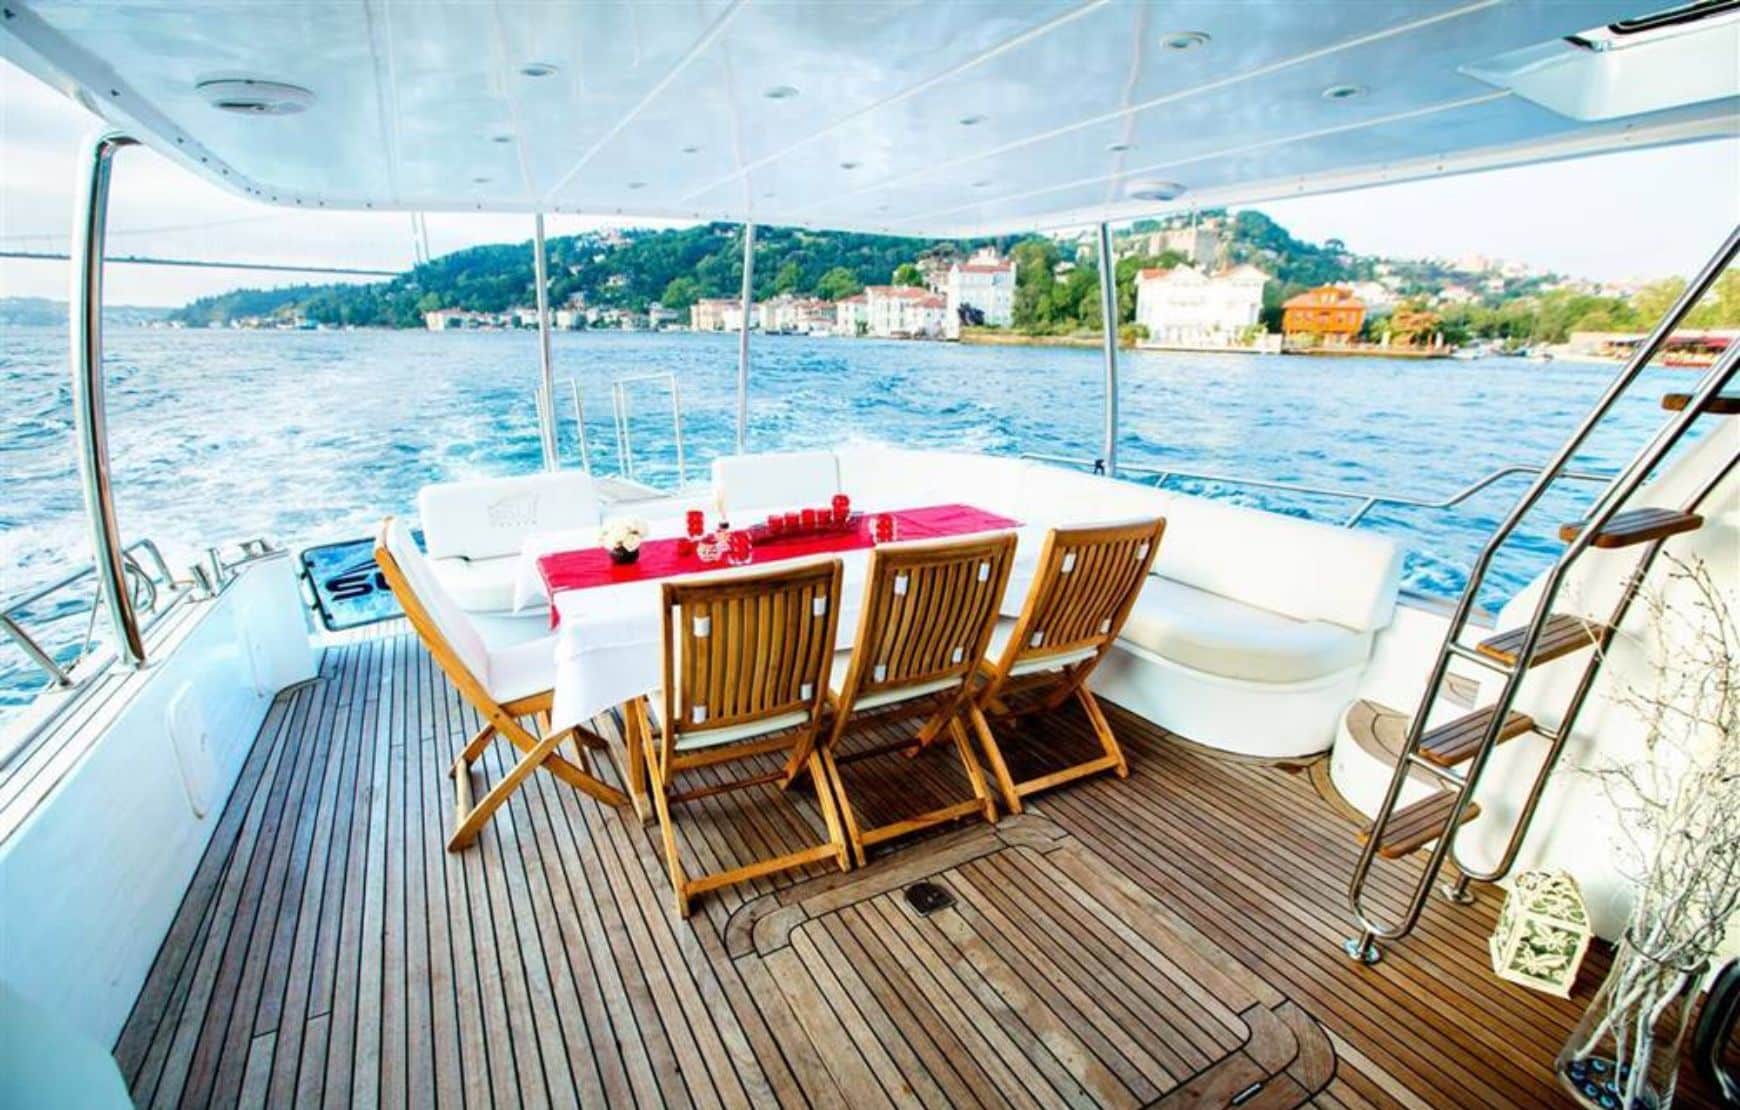 We organize special events in a private yacht in Bosphorus